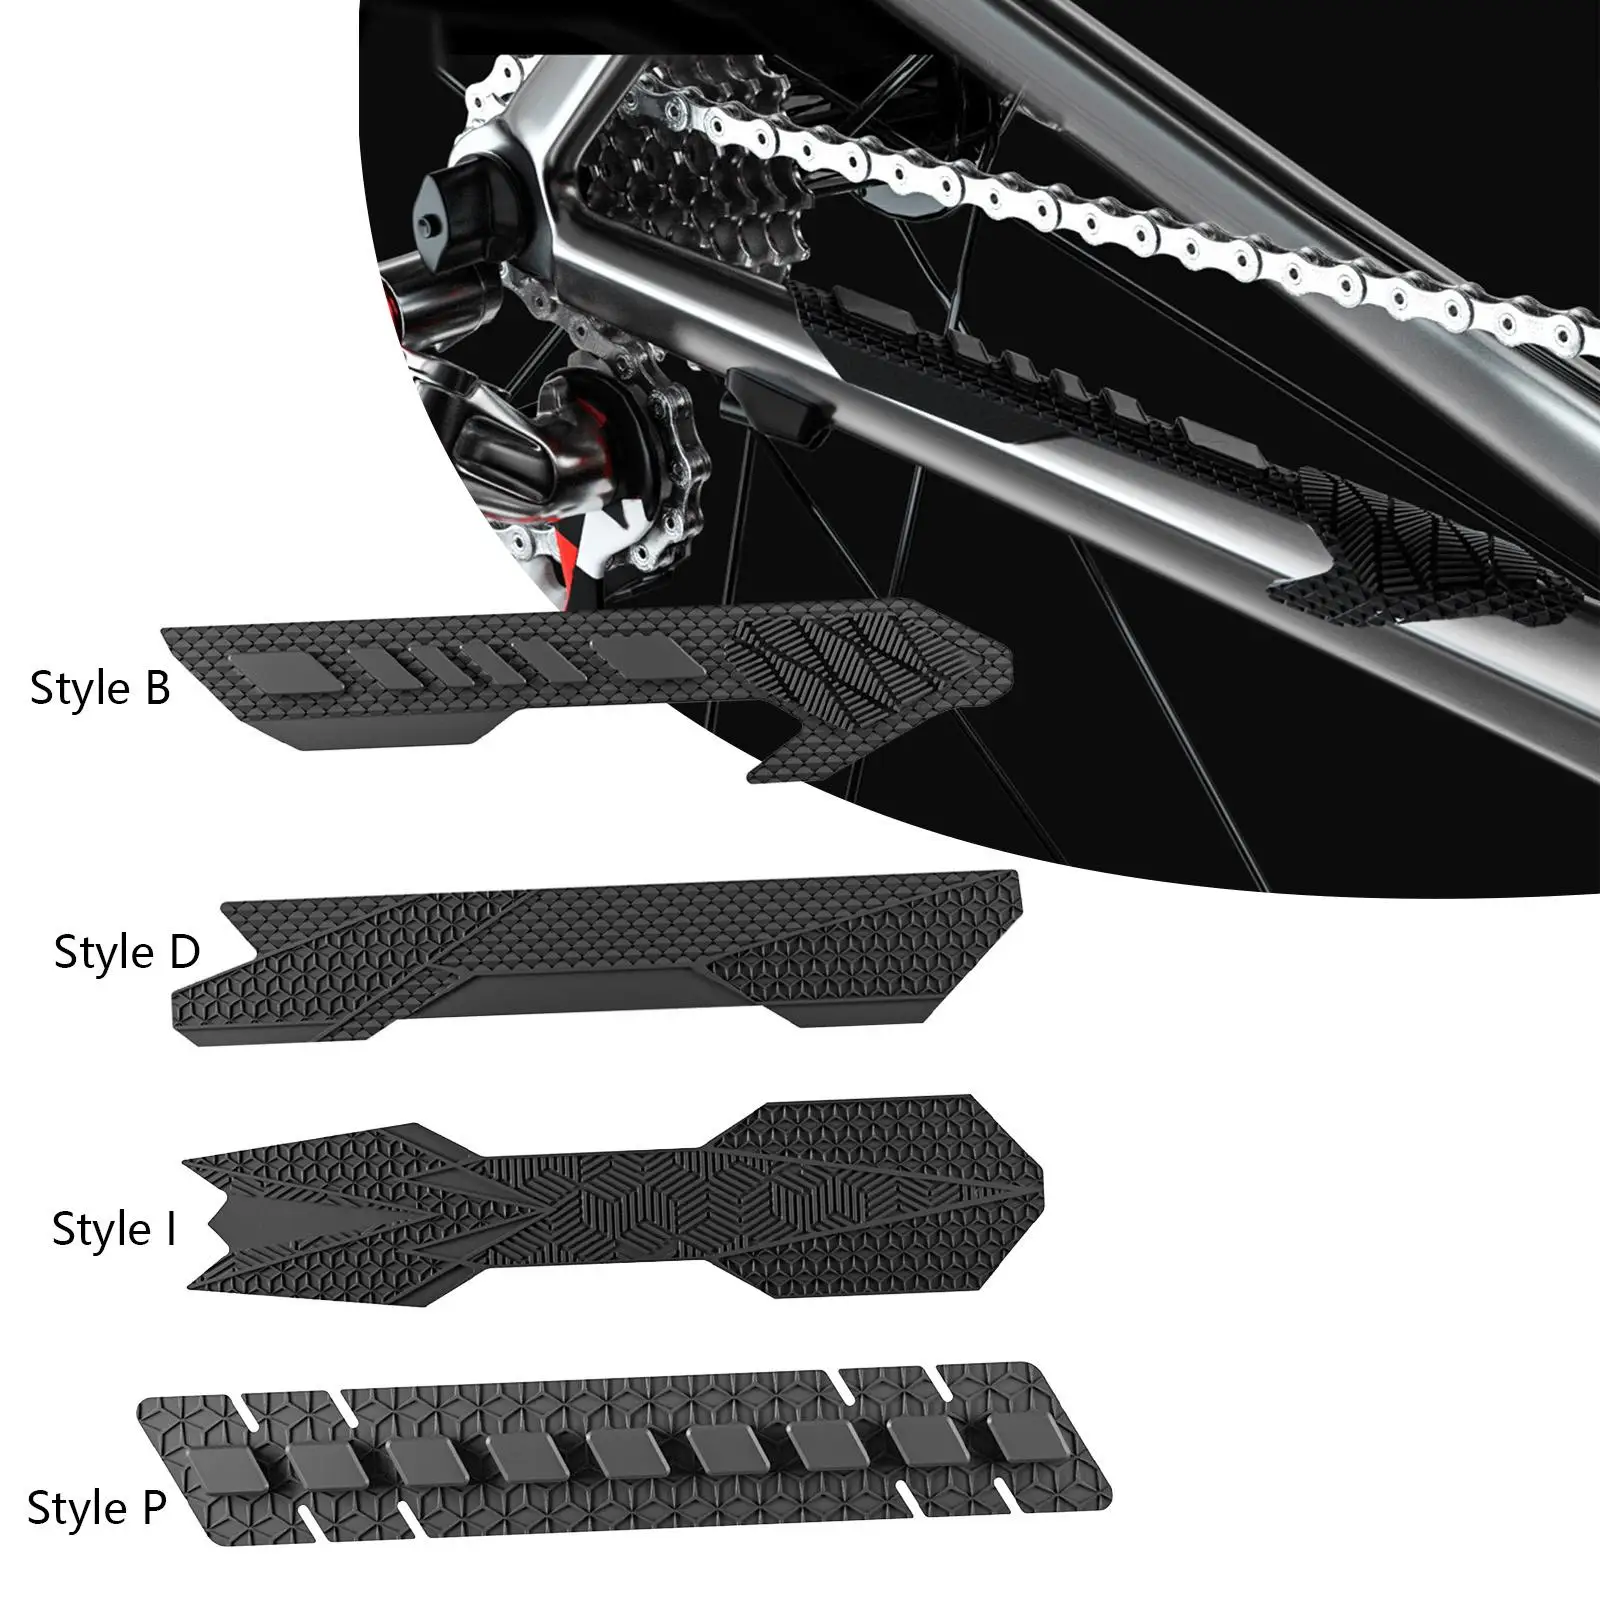 Bike Chainstay Protector Anti Scratch Protective Guard Pad for MTB Mountain Road Bike, Universal